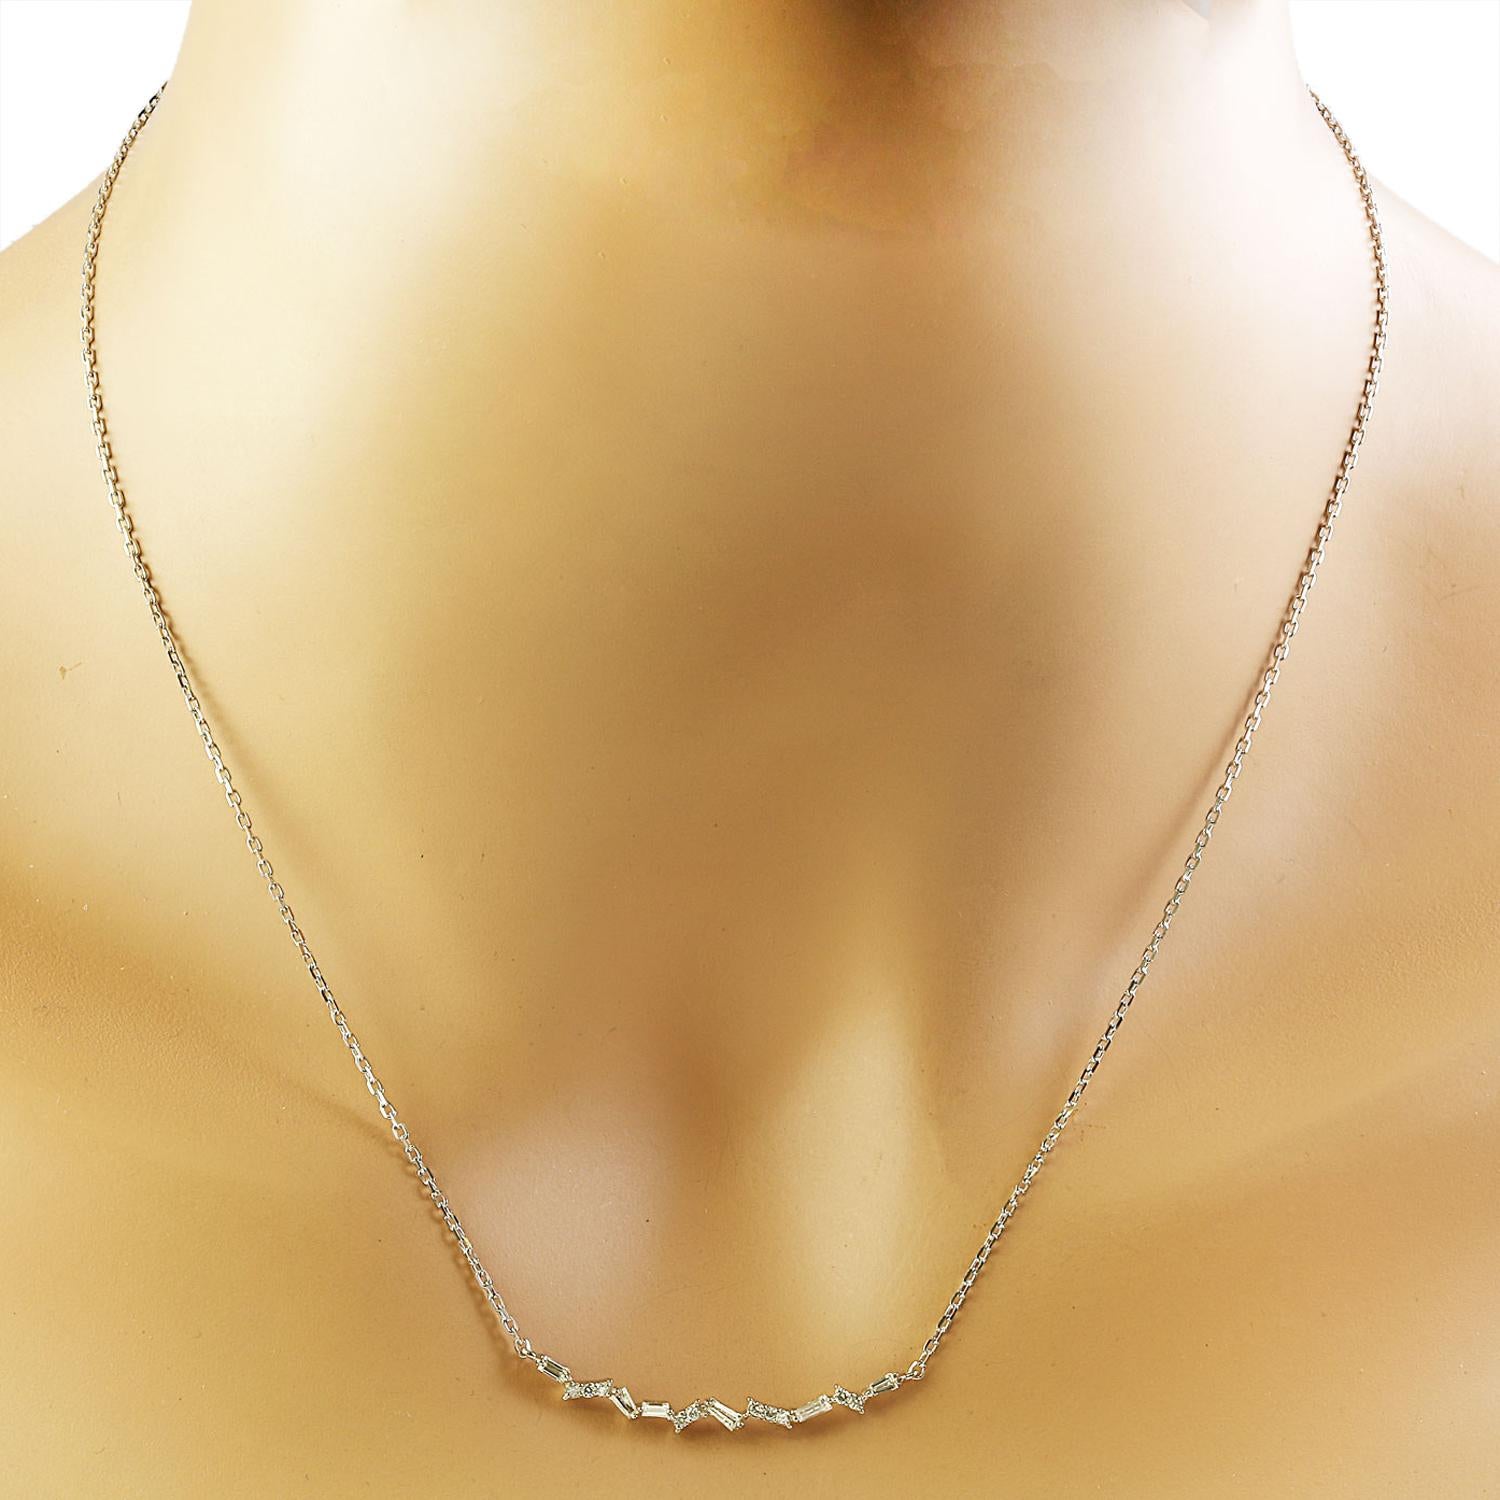 Modern Exquisite Natural Diamond Necklace In 14 Karat White Gold  For Sale